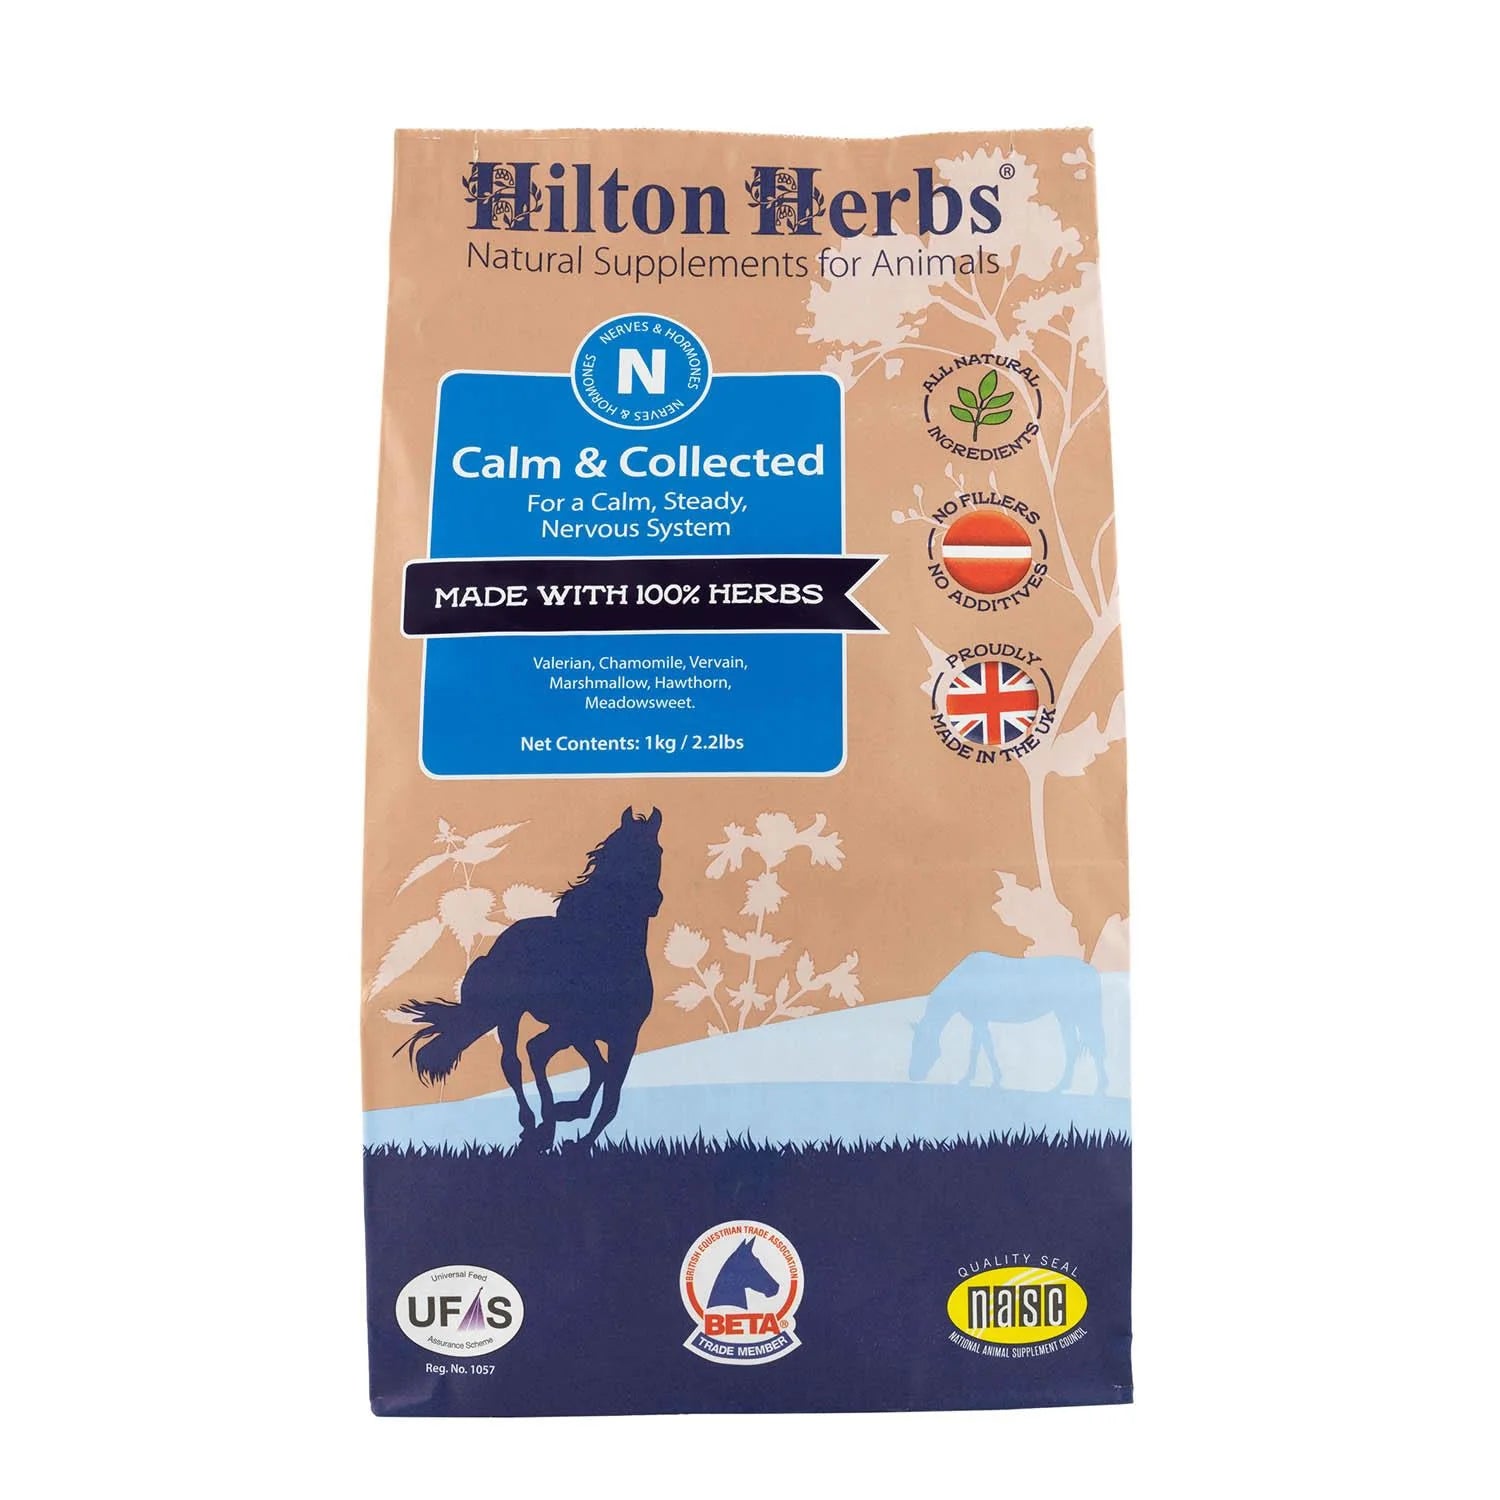 Hilton Herbs Calm & Collected for a balanced nervous system